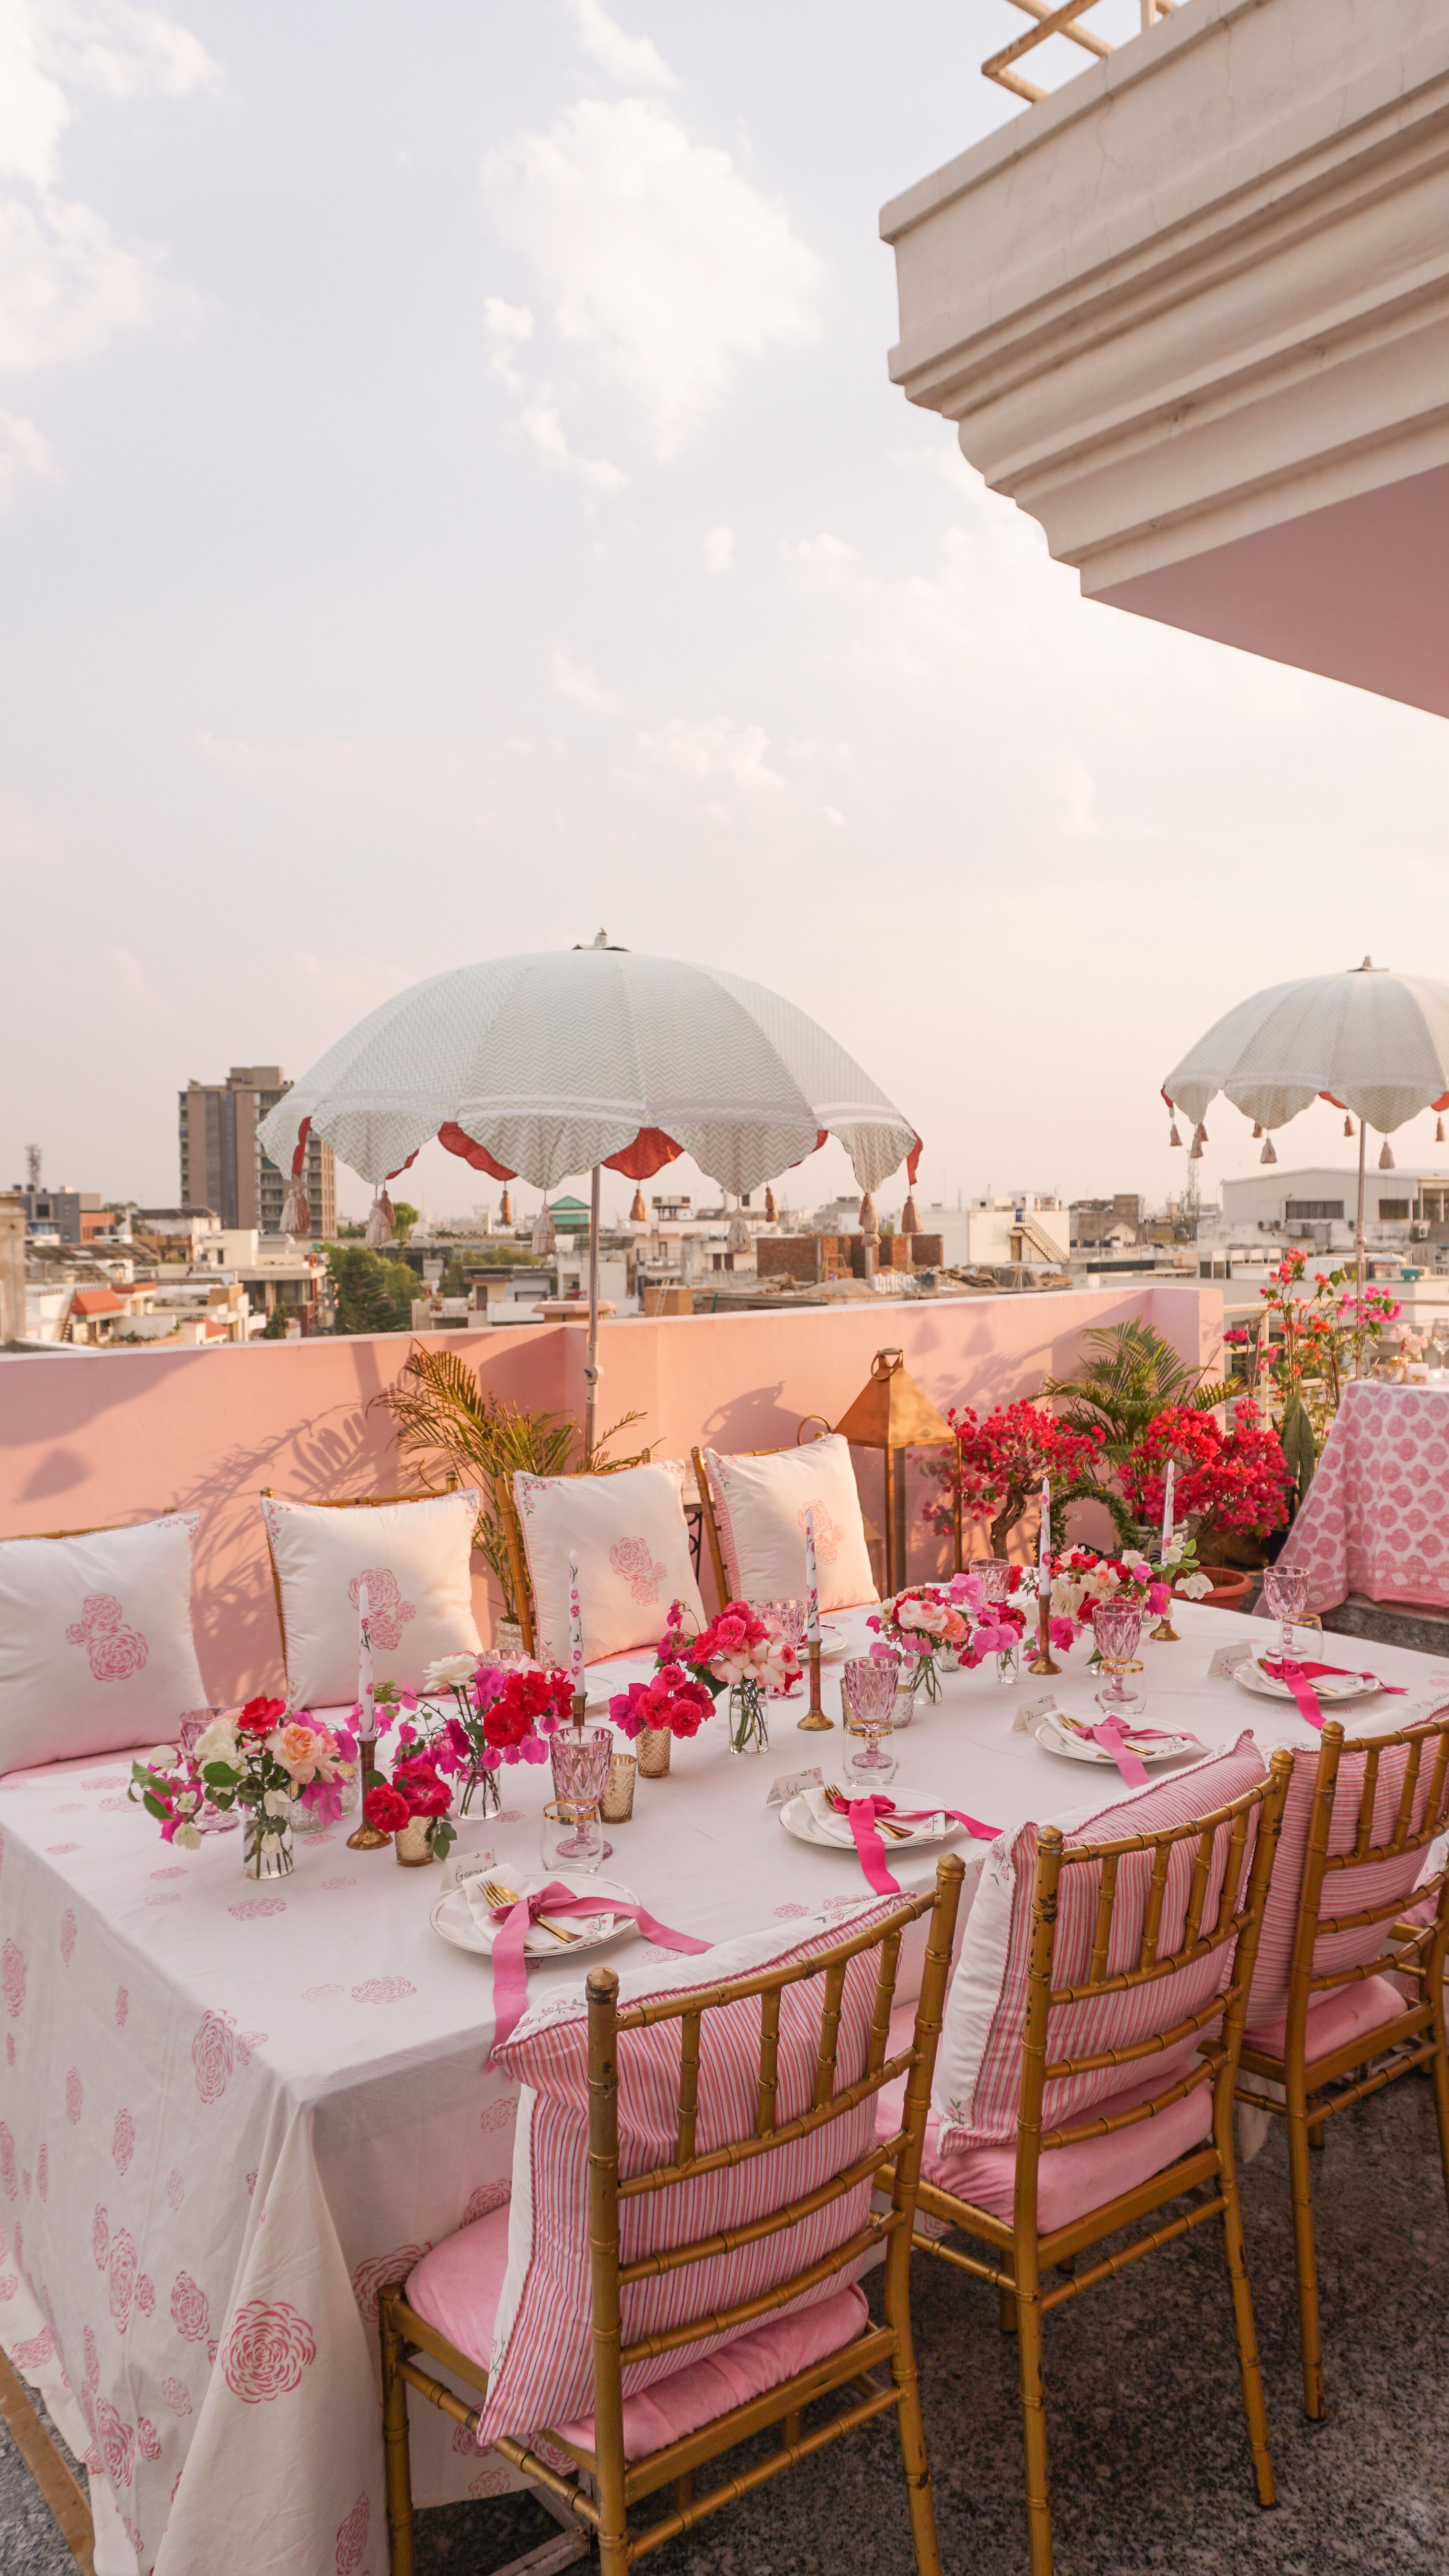 Tablescape in Jaipur by Rosanna Falconer